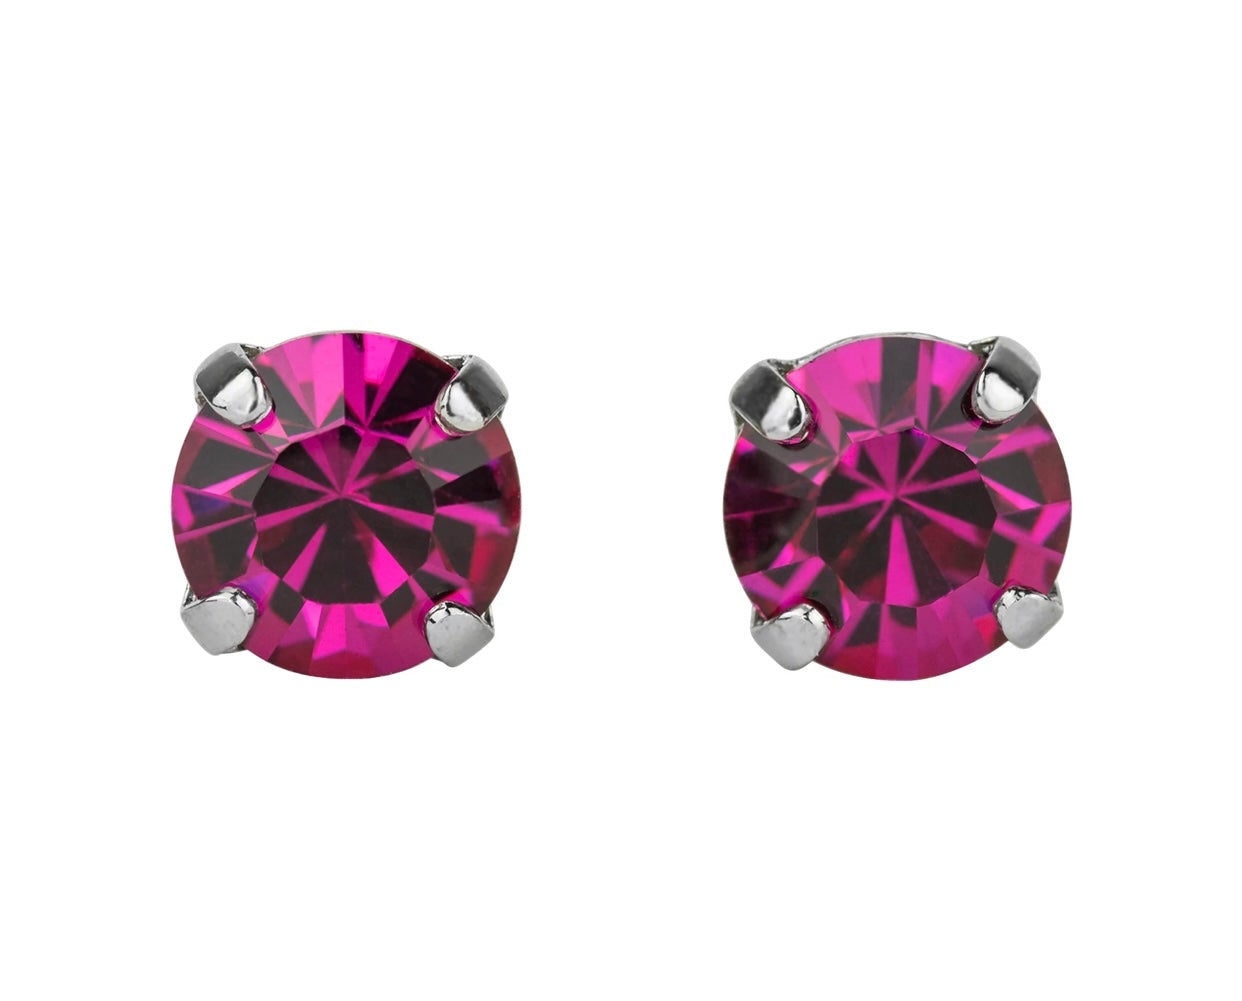 Mariana Antiqued Silver Plated Must-Have Crystal Post Earrings in "Fuchsia”